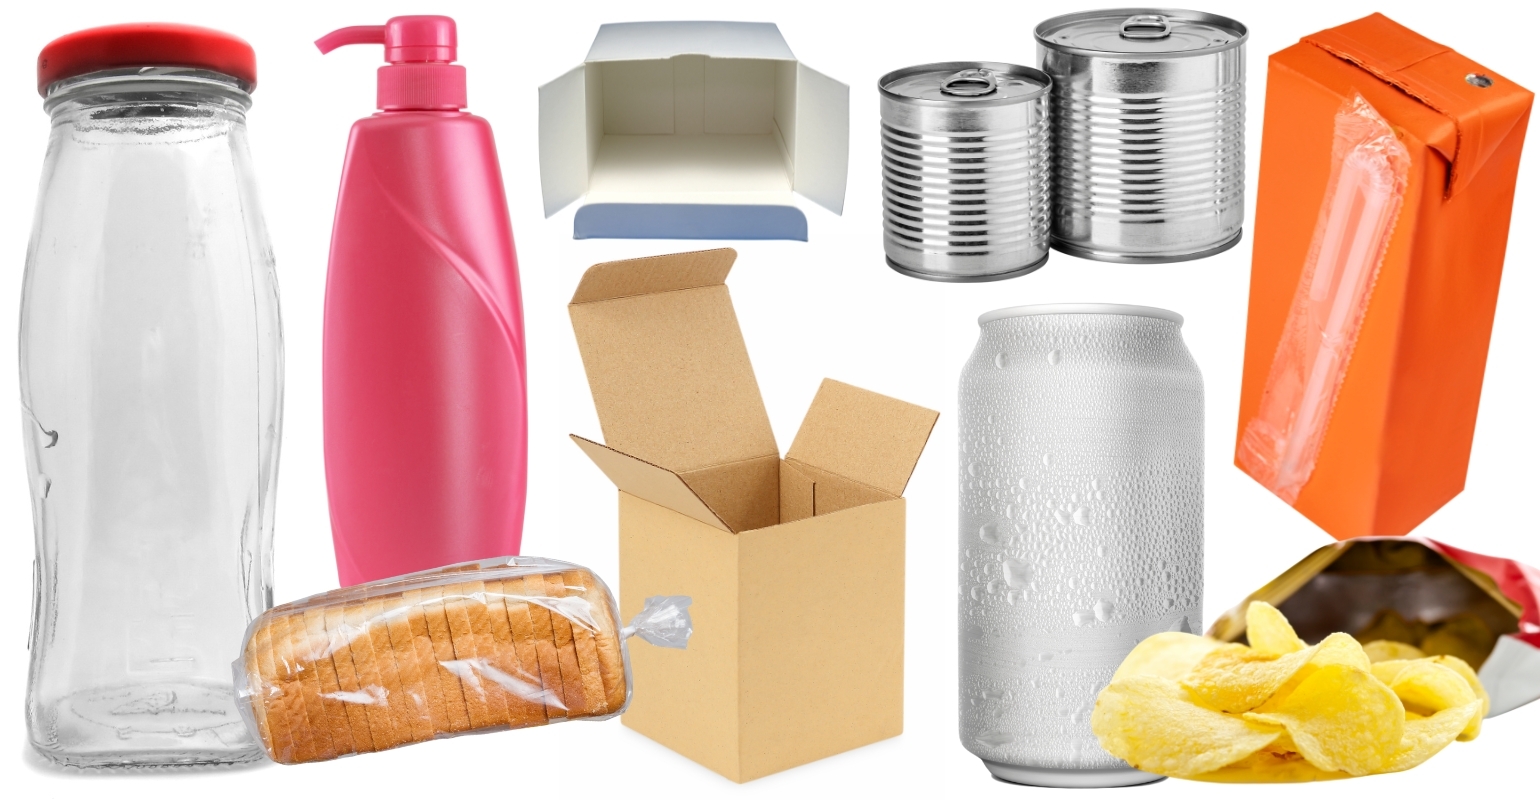 What Are The Different Types Of Packaging Materials?